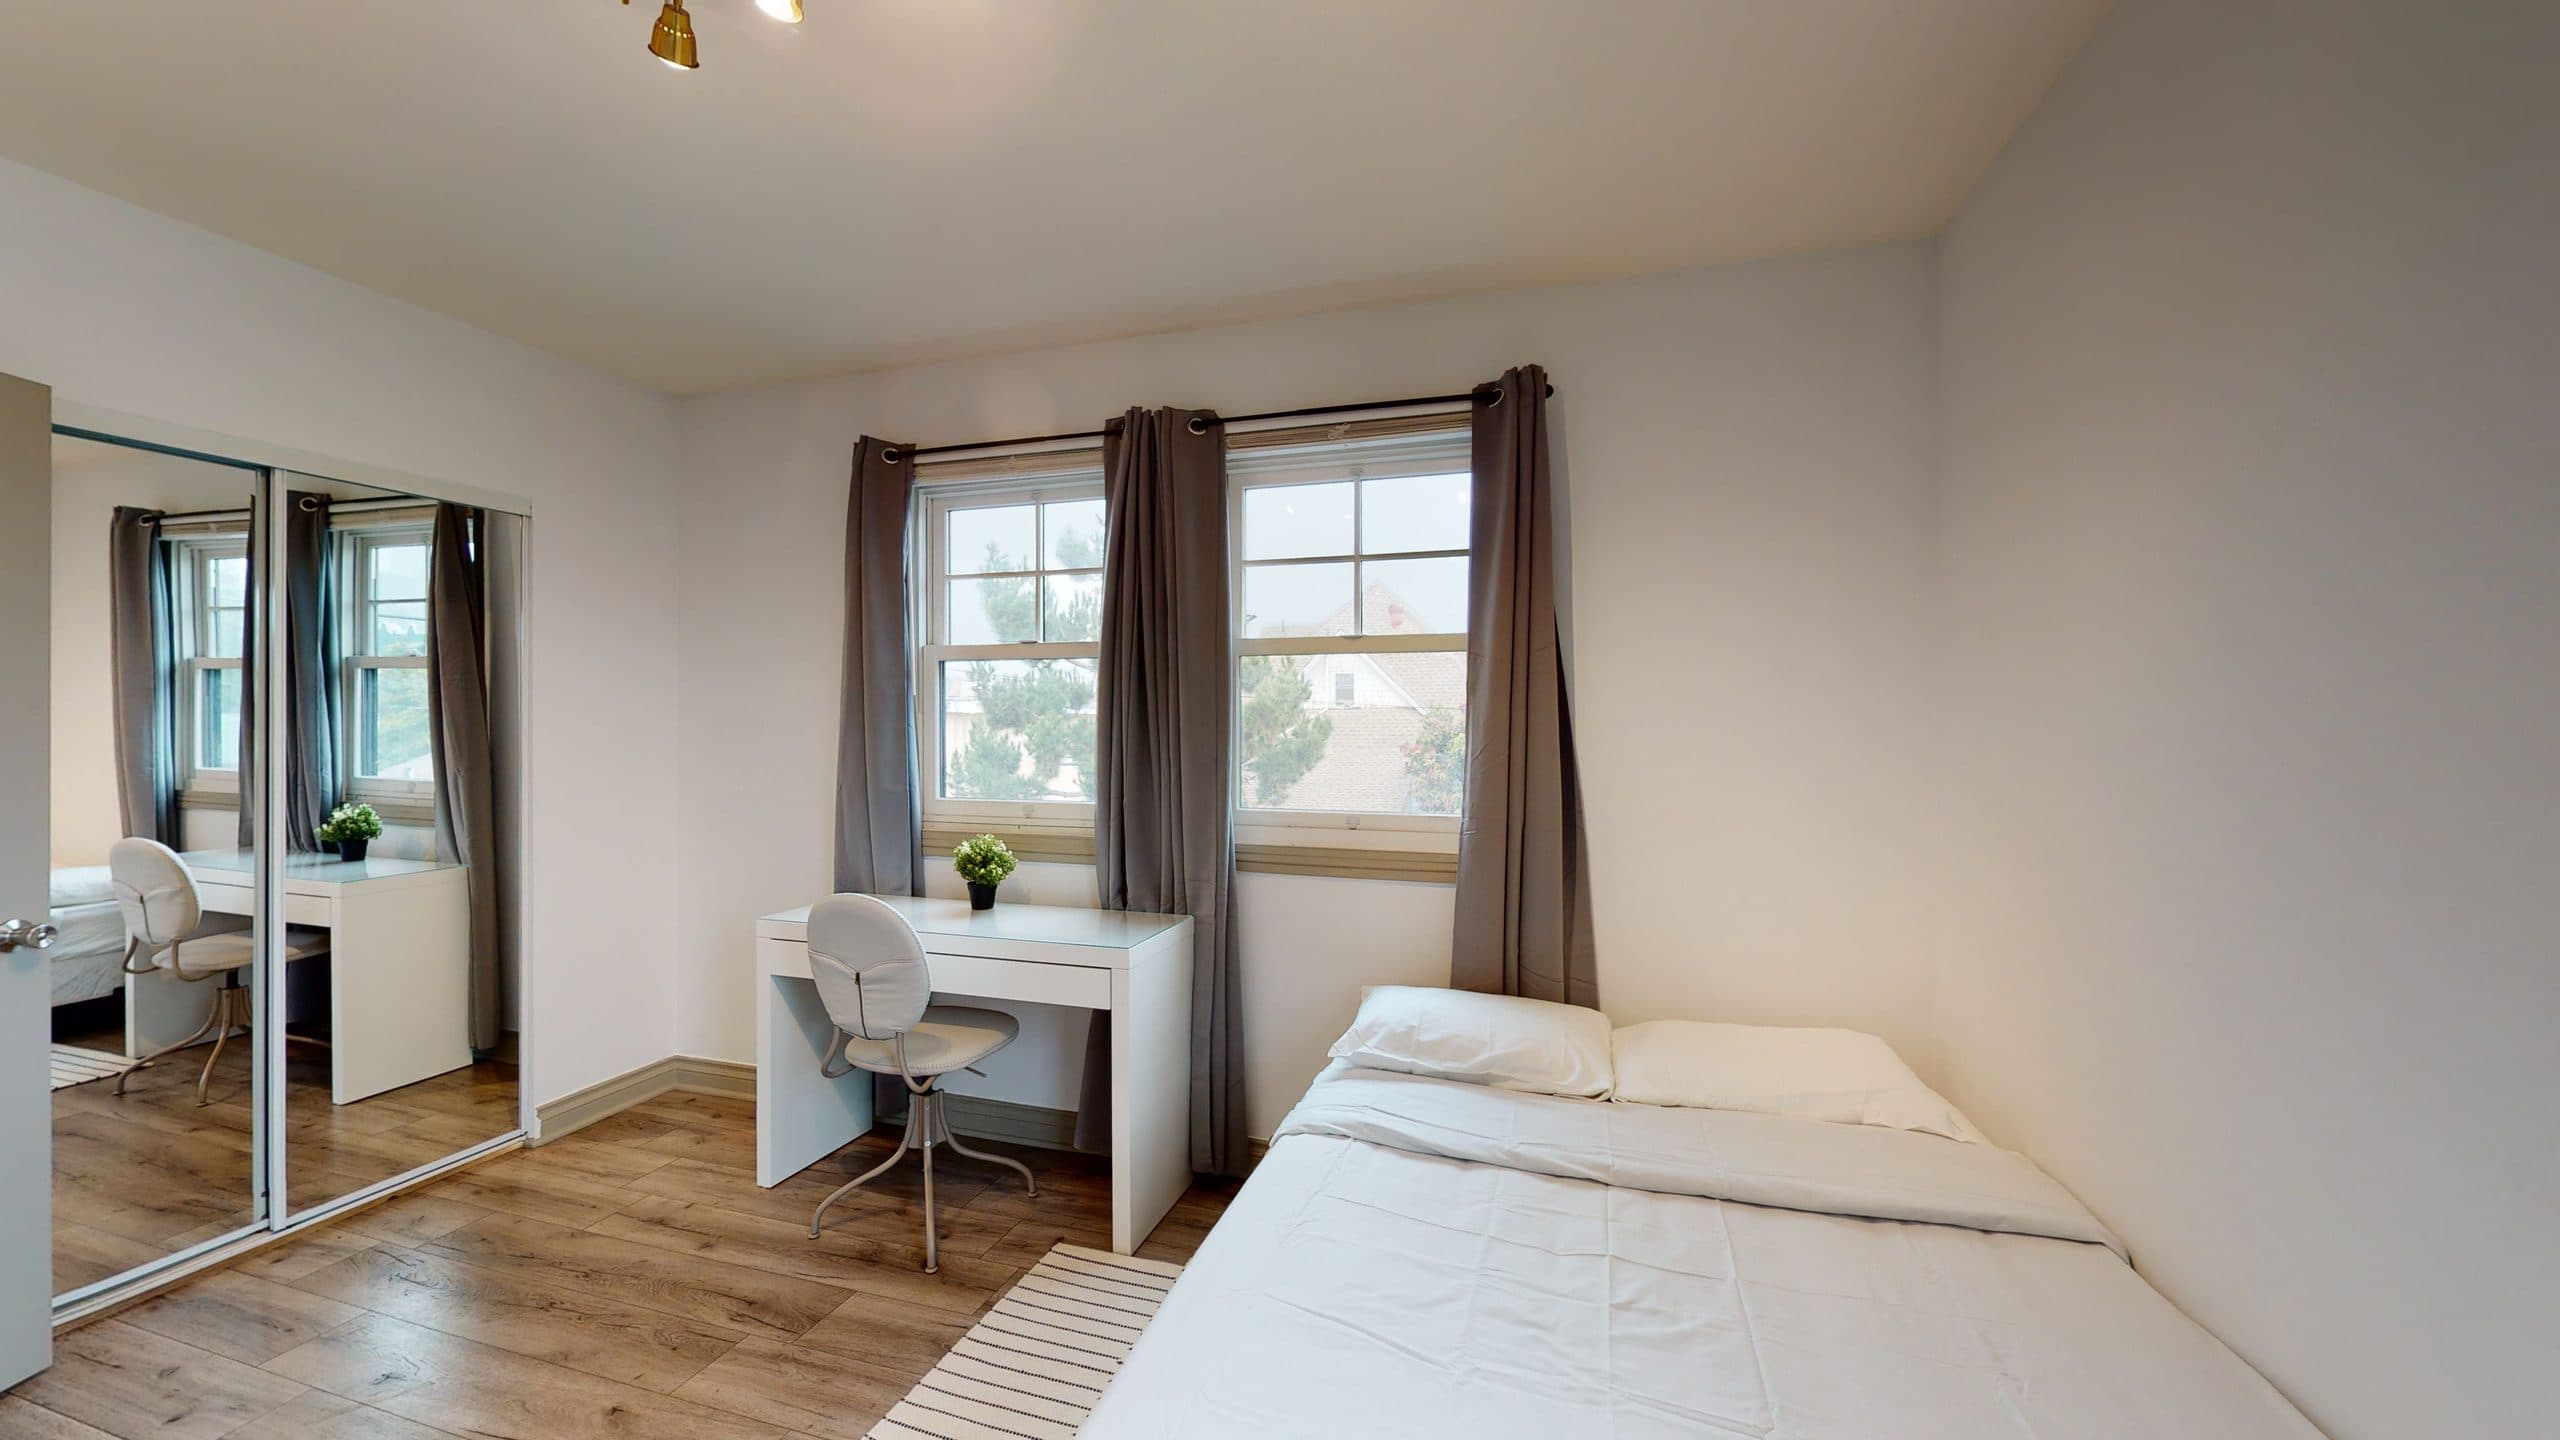 Photo 29 of #2280: Queen Bedroom A at June Homes